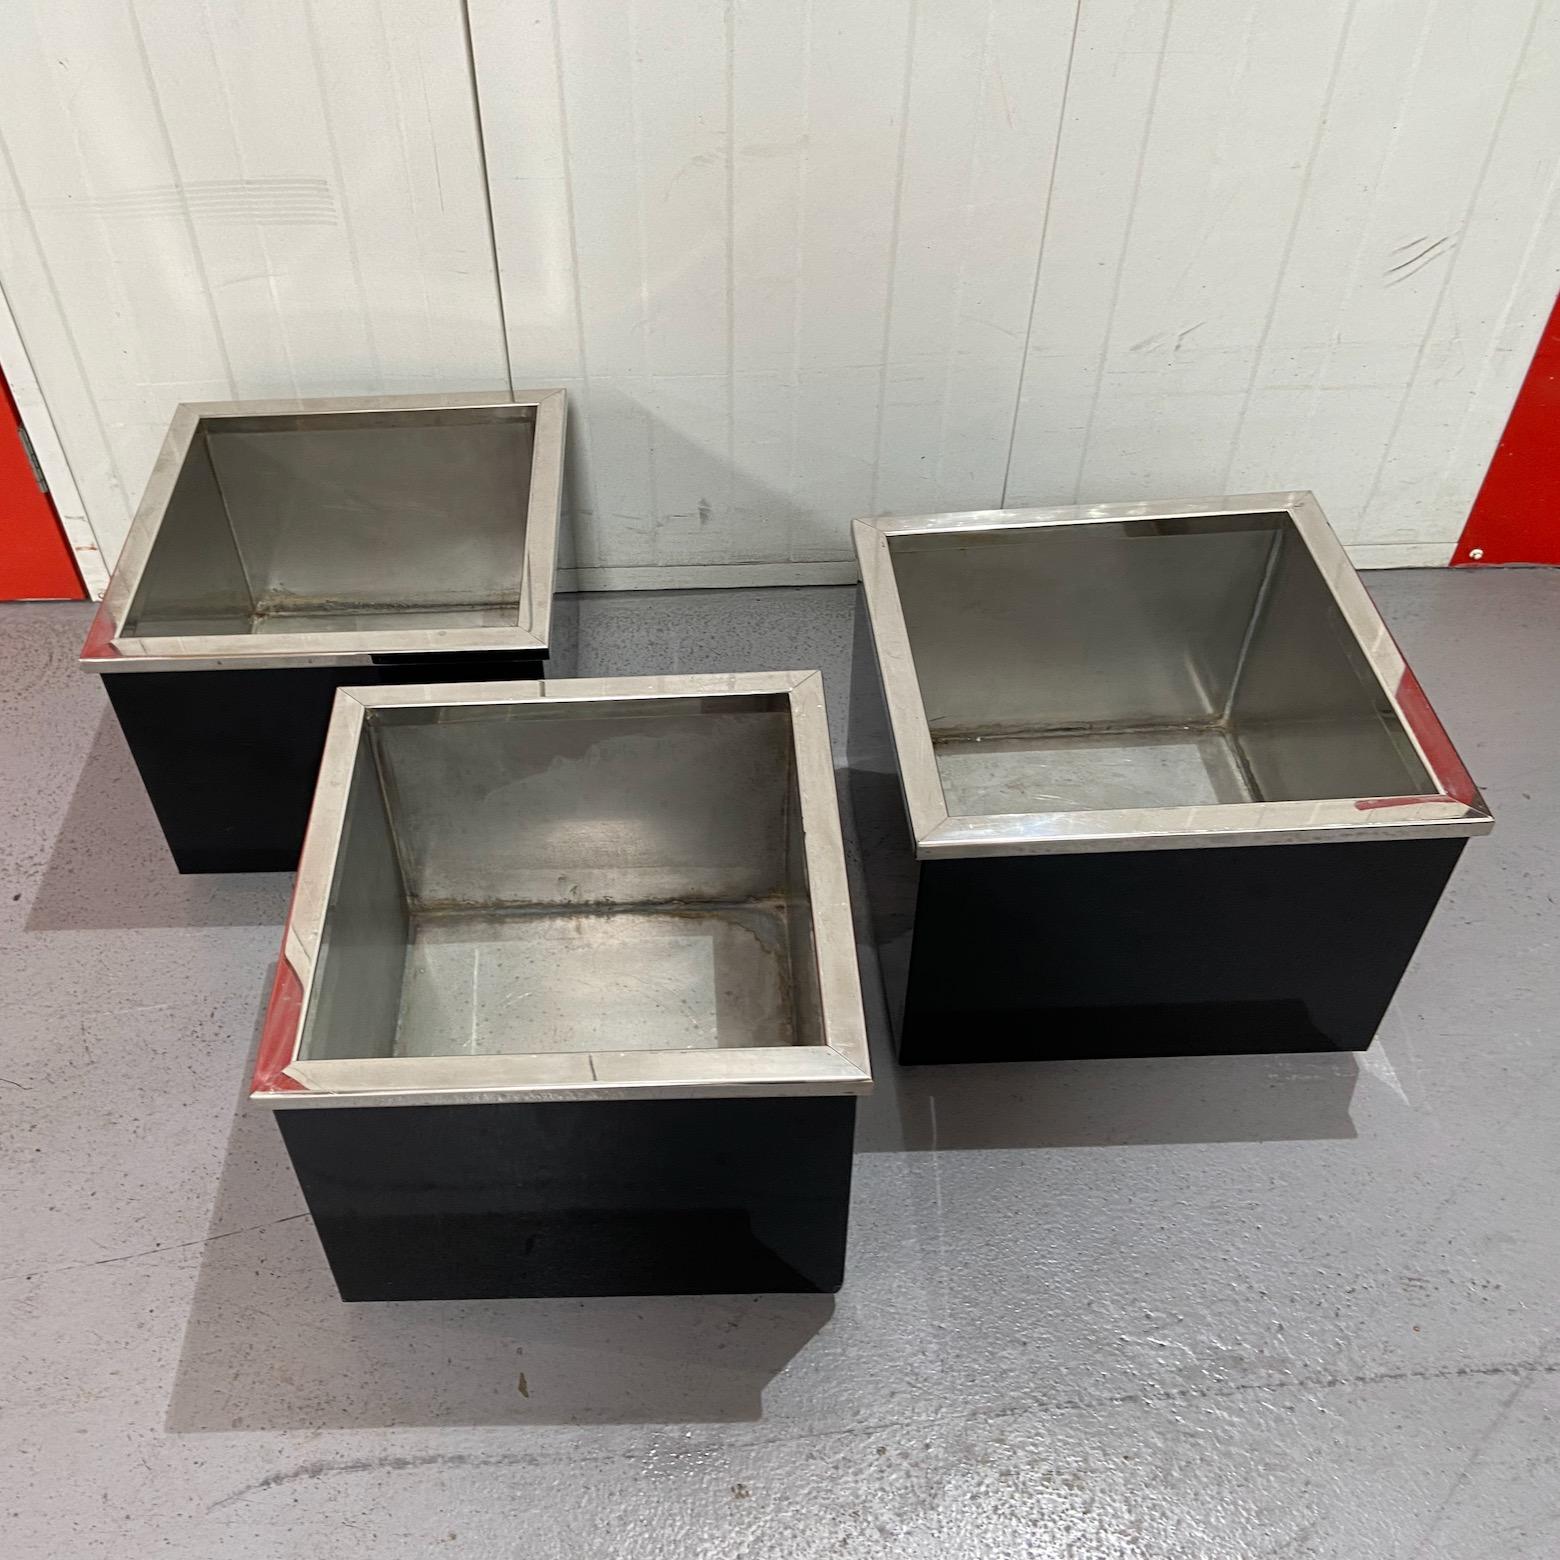 1960s-70s black enamel and chrome metal cubic planters, manner of Willy Rizzo For Sale 4